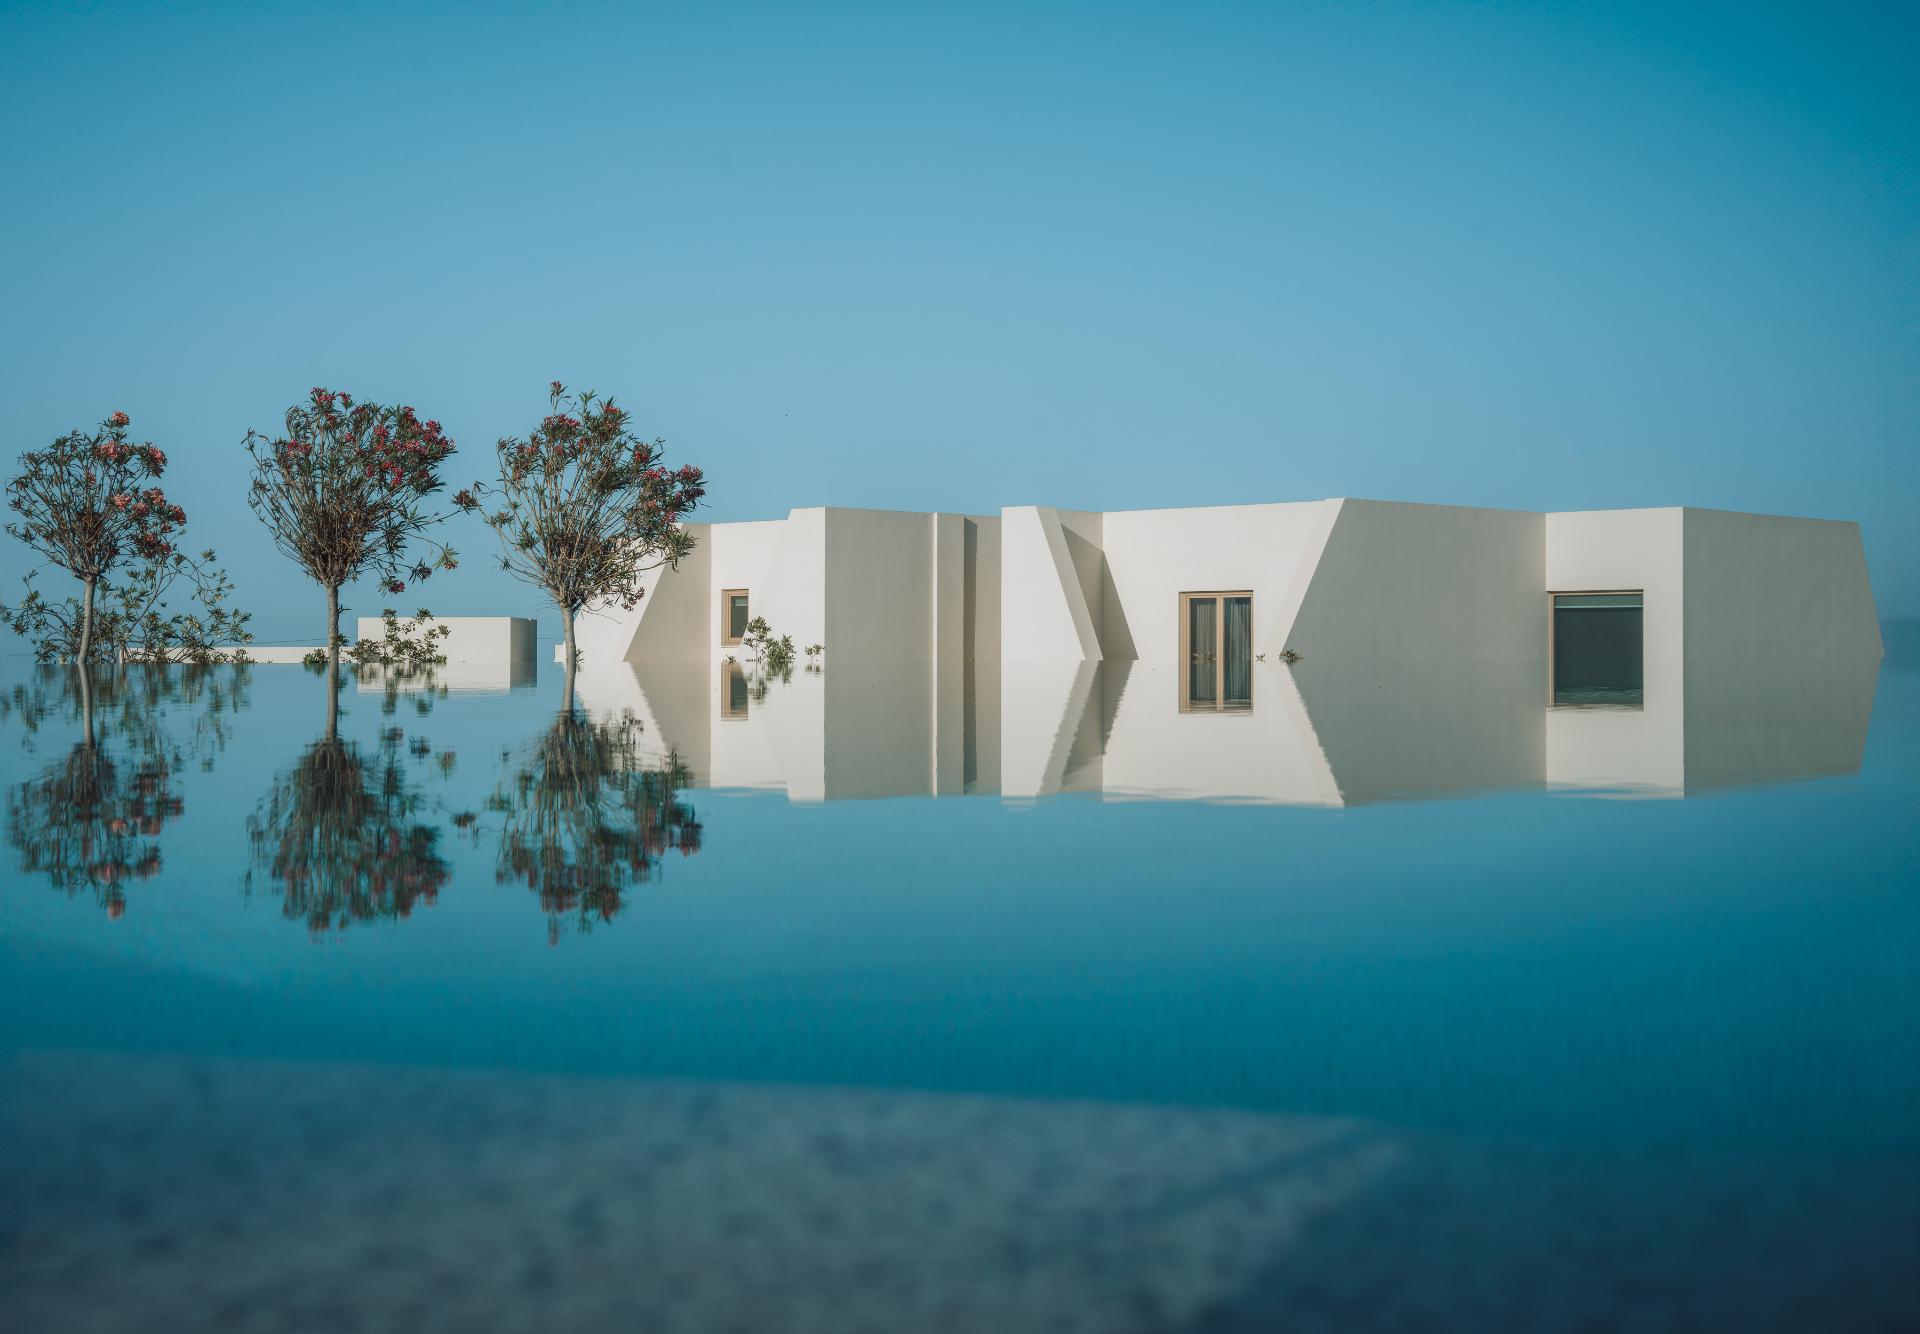 Modern white buildings with angular designs and flowering trees reflected on a still water surface.